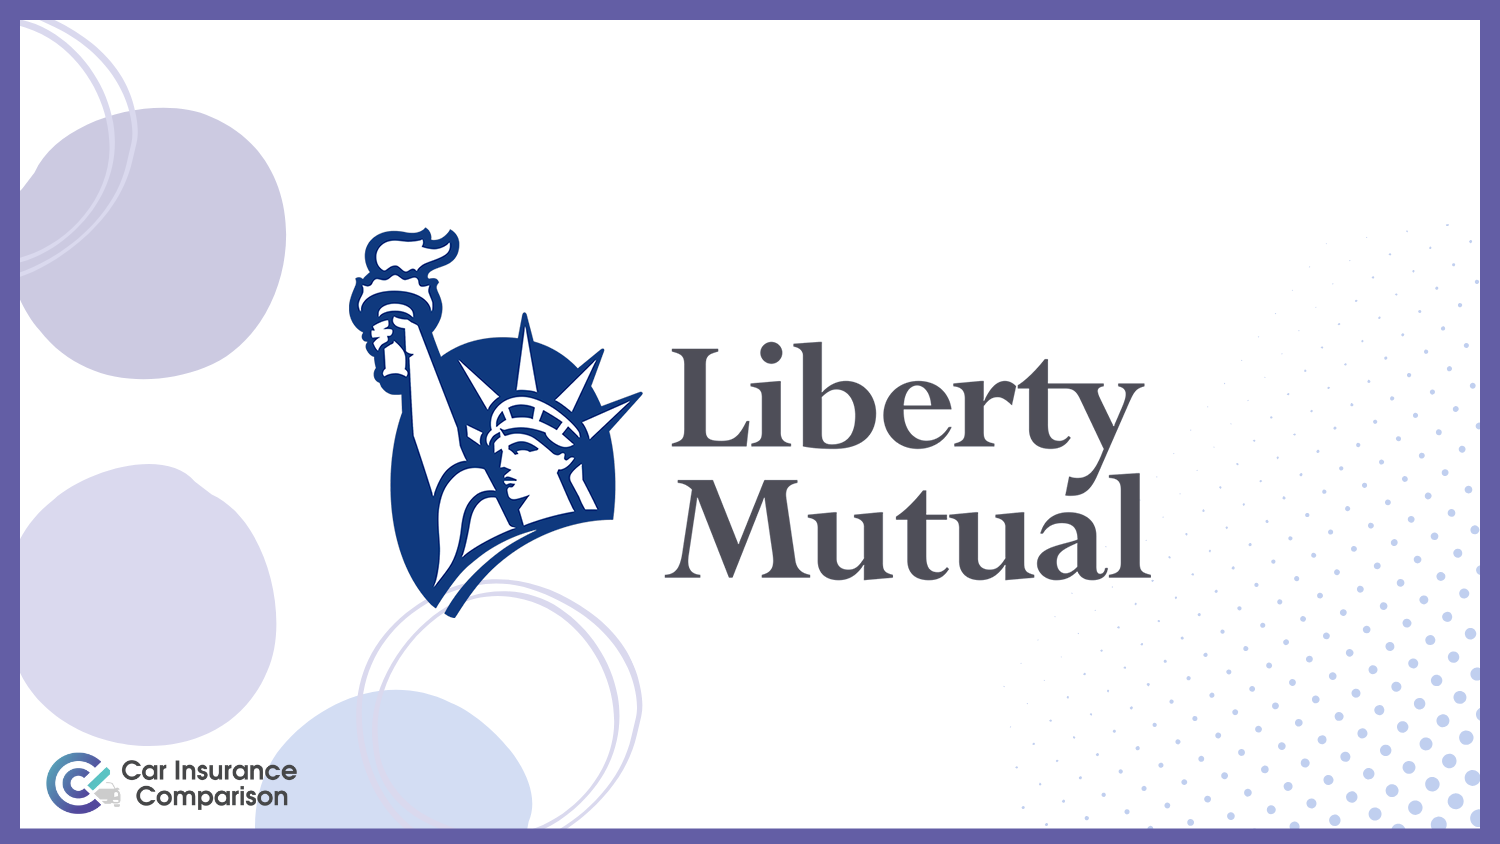 Liberty Mutual: Best Car Insurance for College Graduates